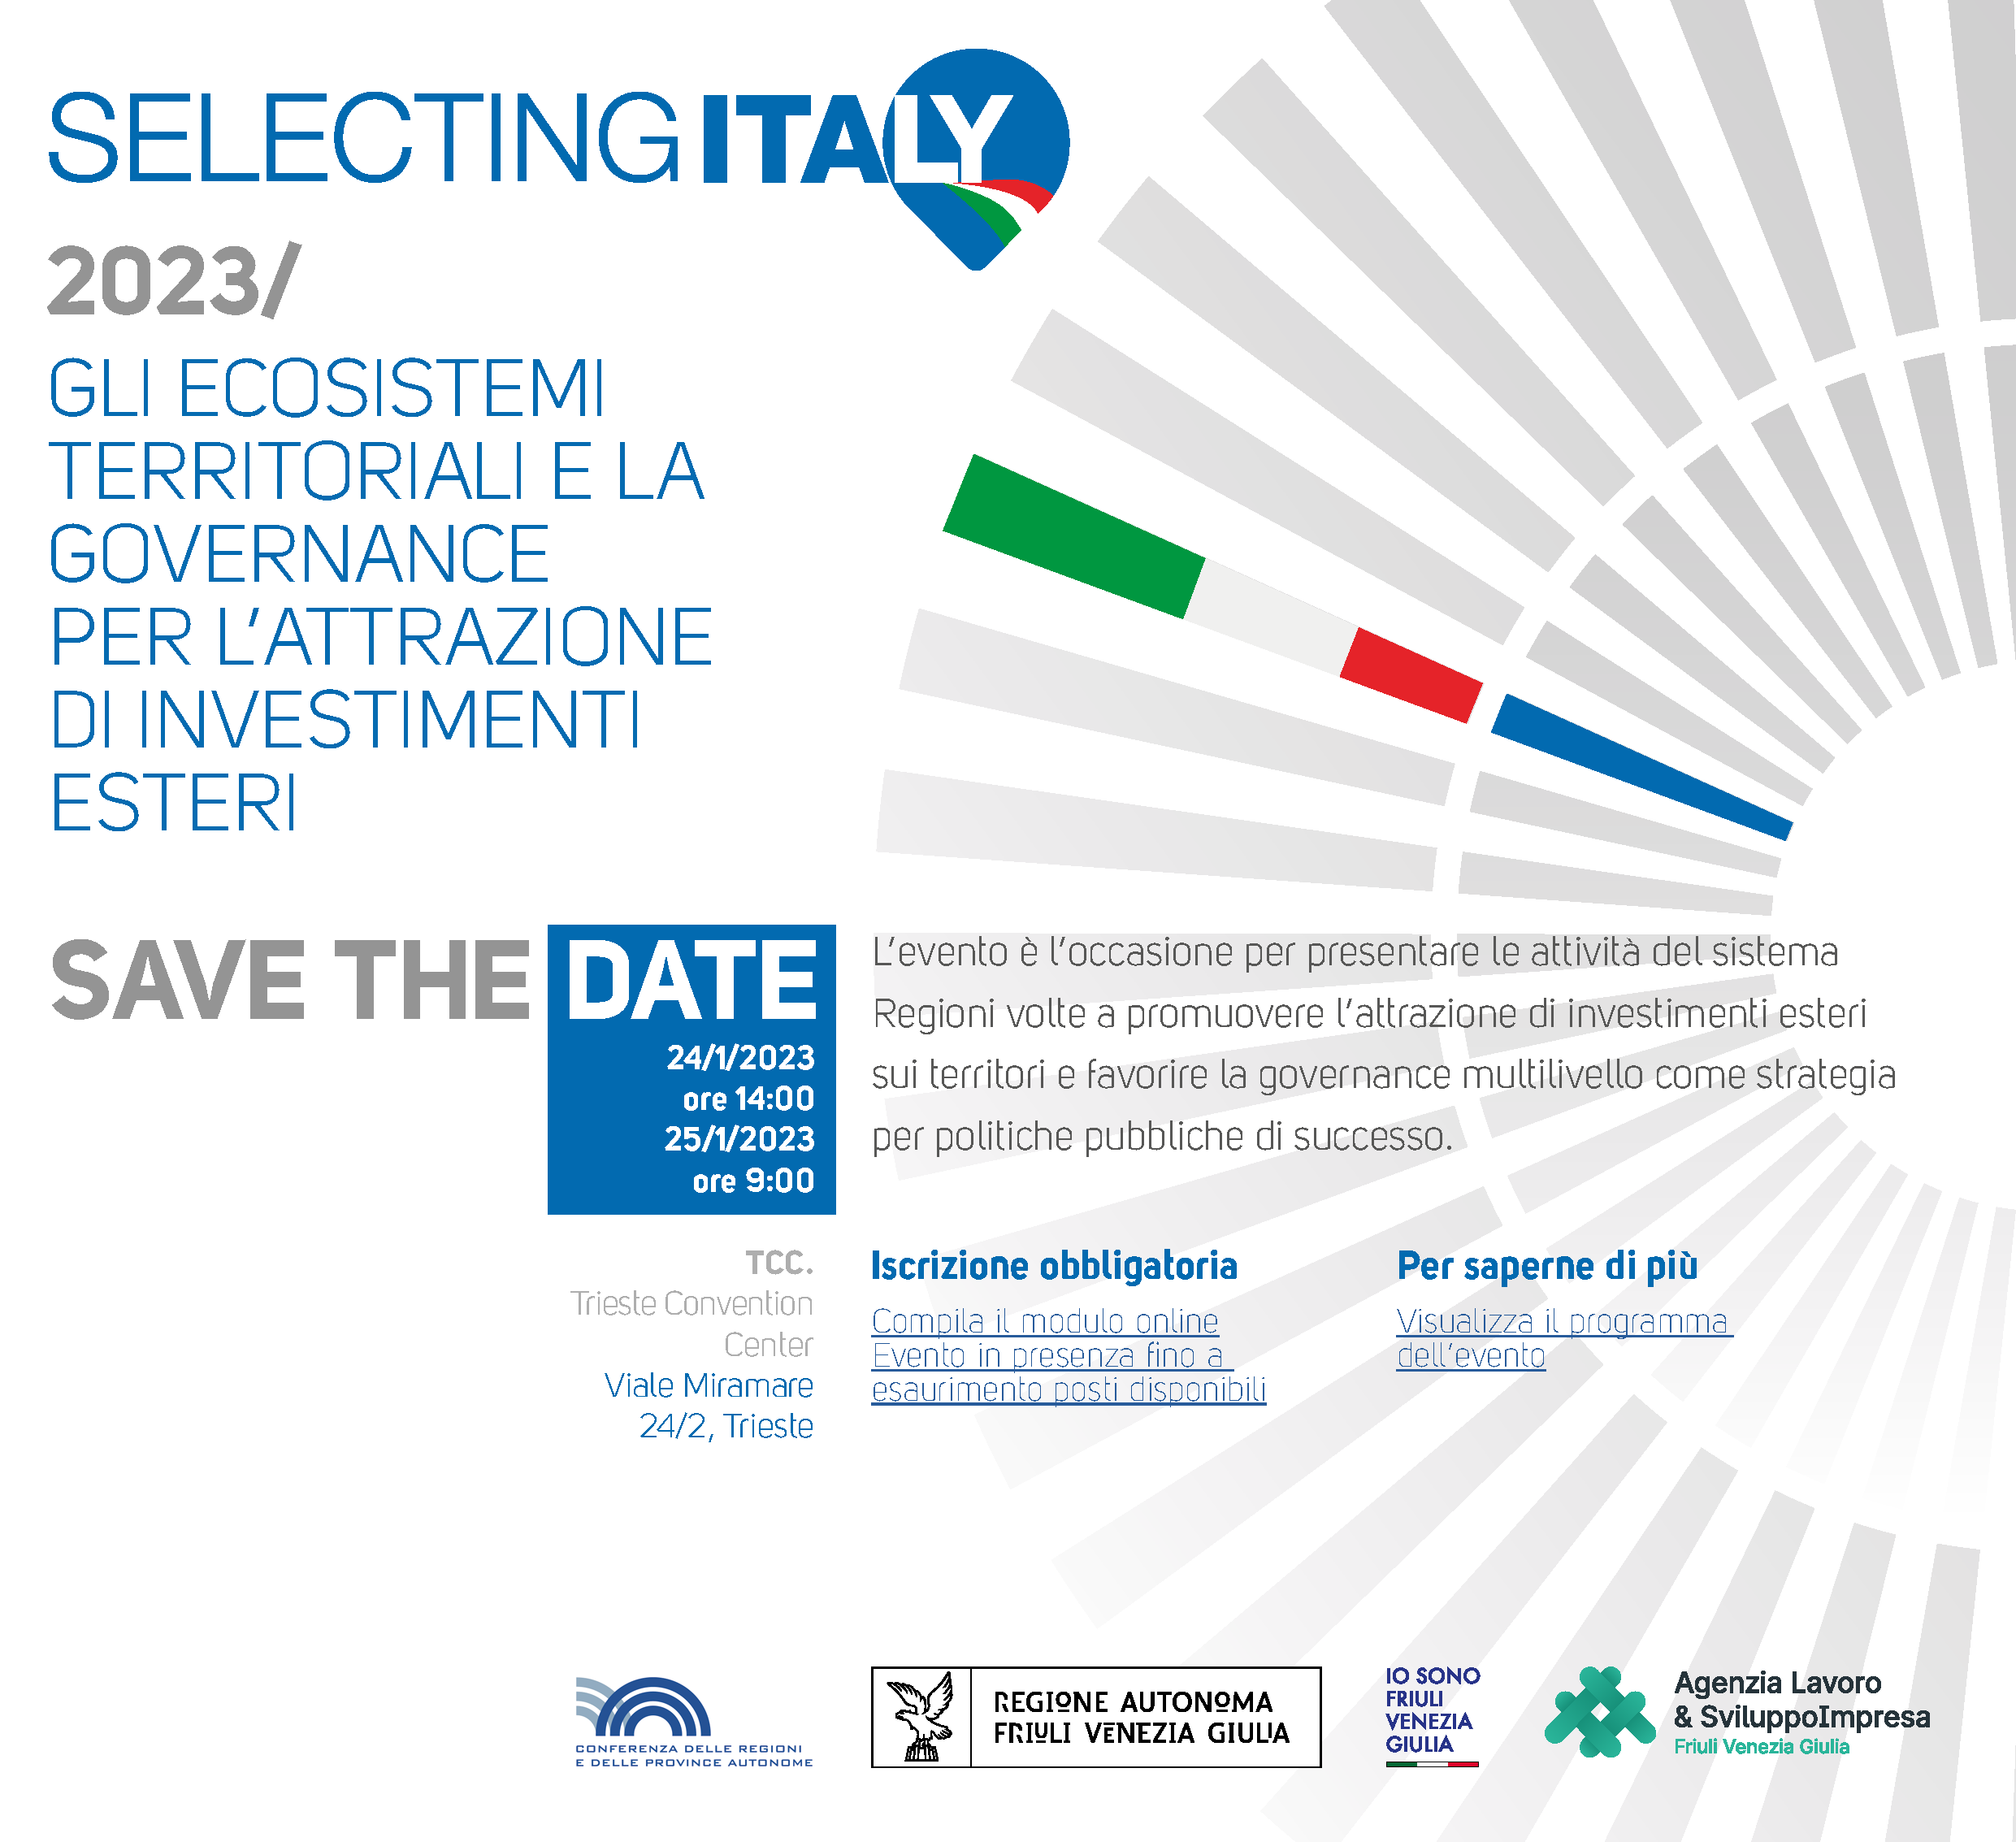 file/ELEMENTO_NEWSLETTER/25156/save_the_date_fvg.png